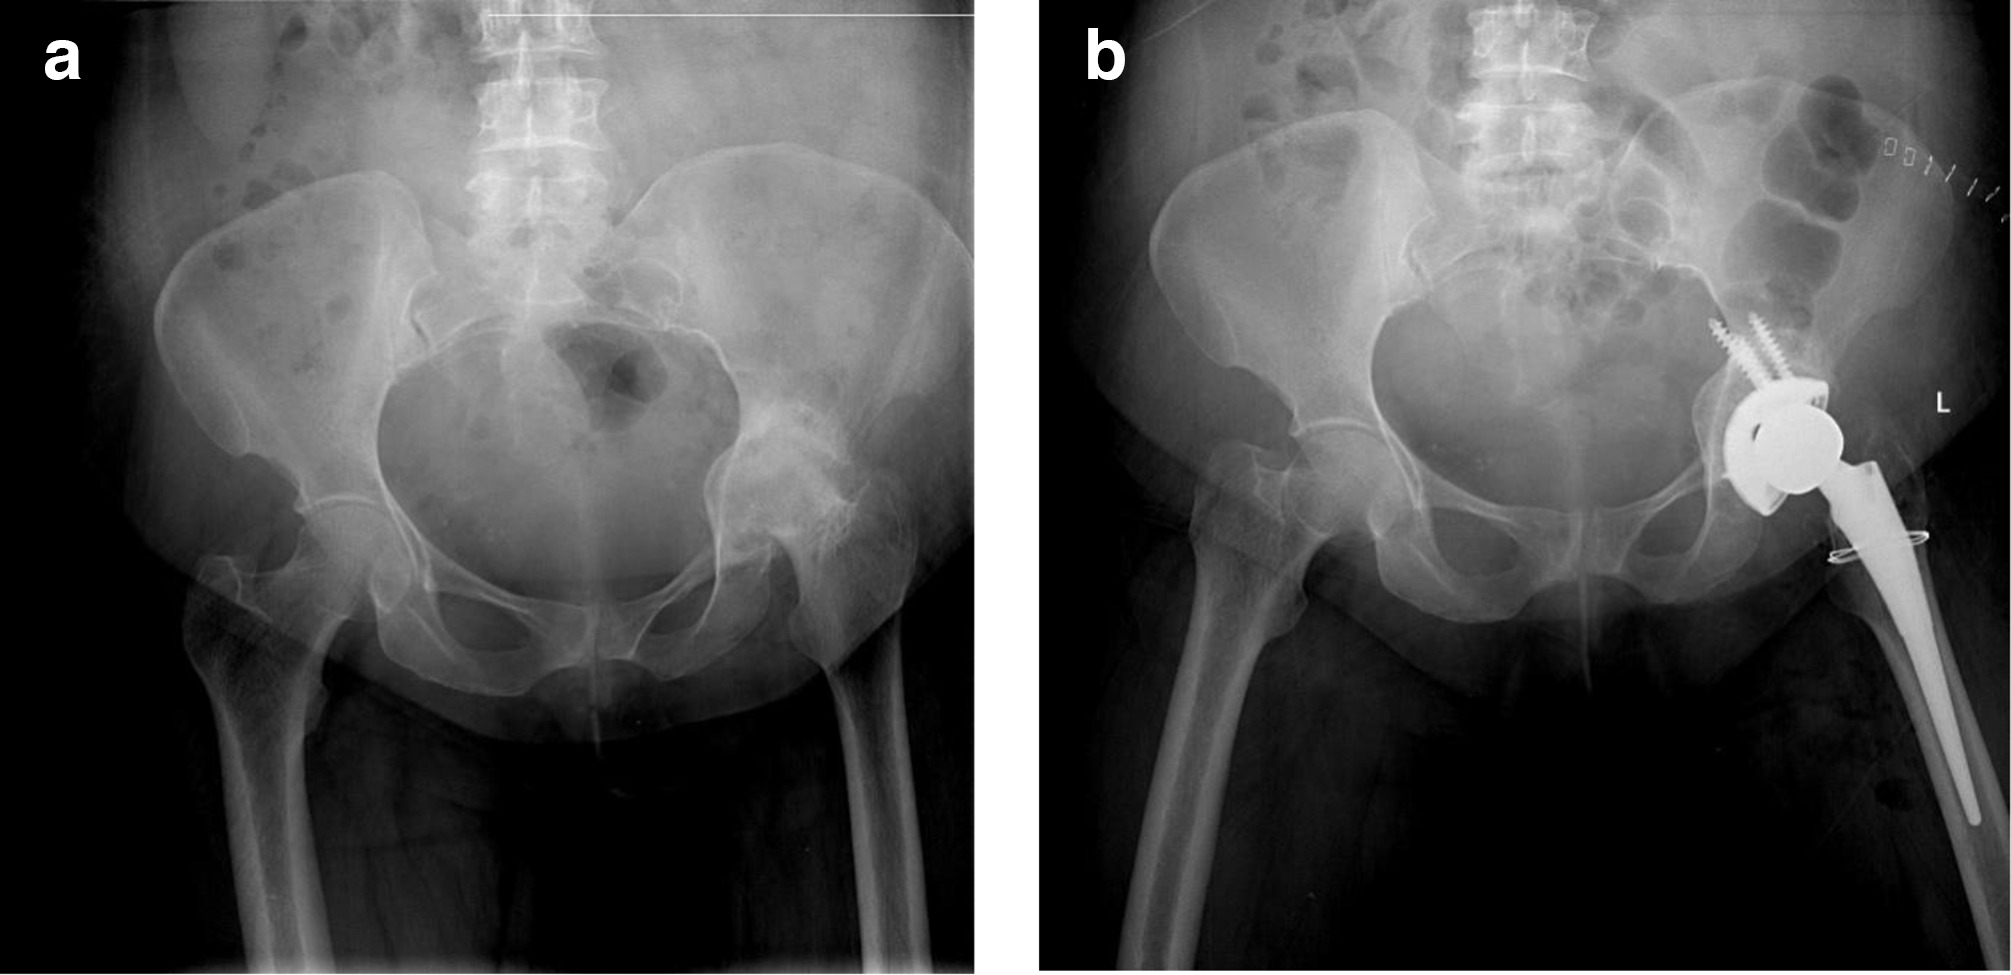 Fig. 2 
          a) Preoperative anterior-posterior radiograph showing unilateral osteoarthritis secondary to pyogenic infection. b) Postoperative radiograph showing total hip arthroplasty and intraoperative femoral fracture managed with wire cerclage.
        